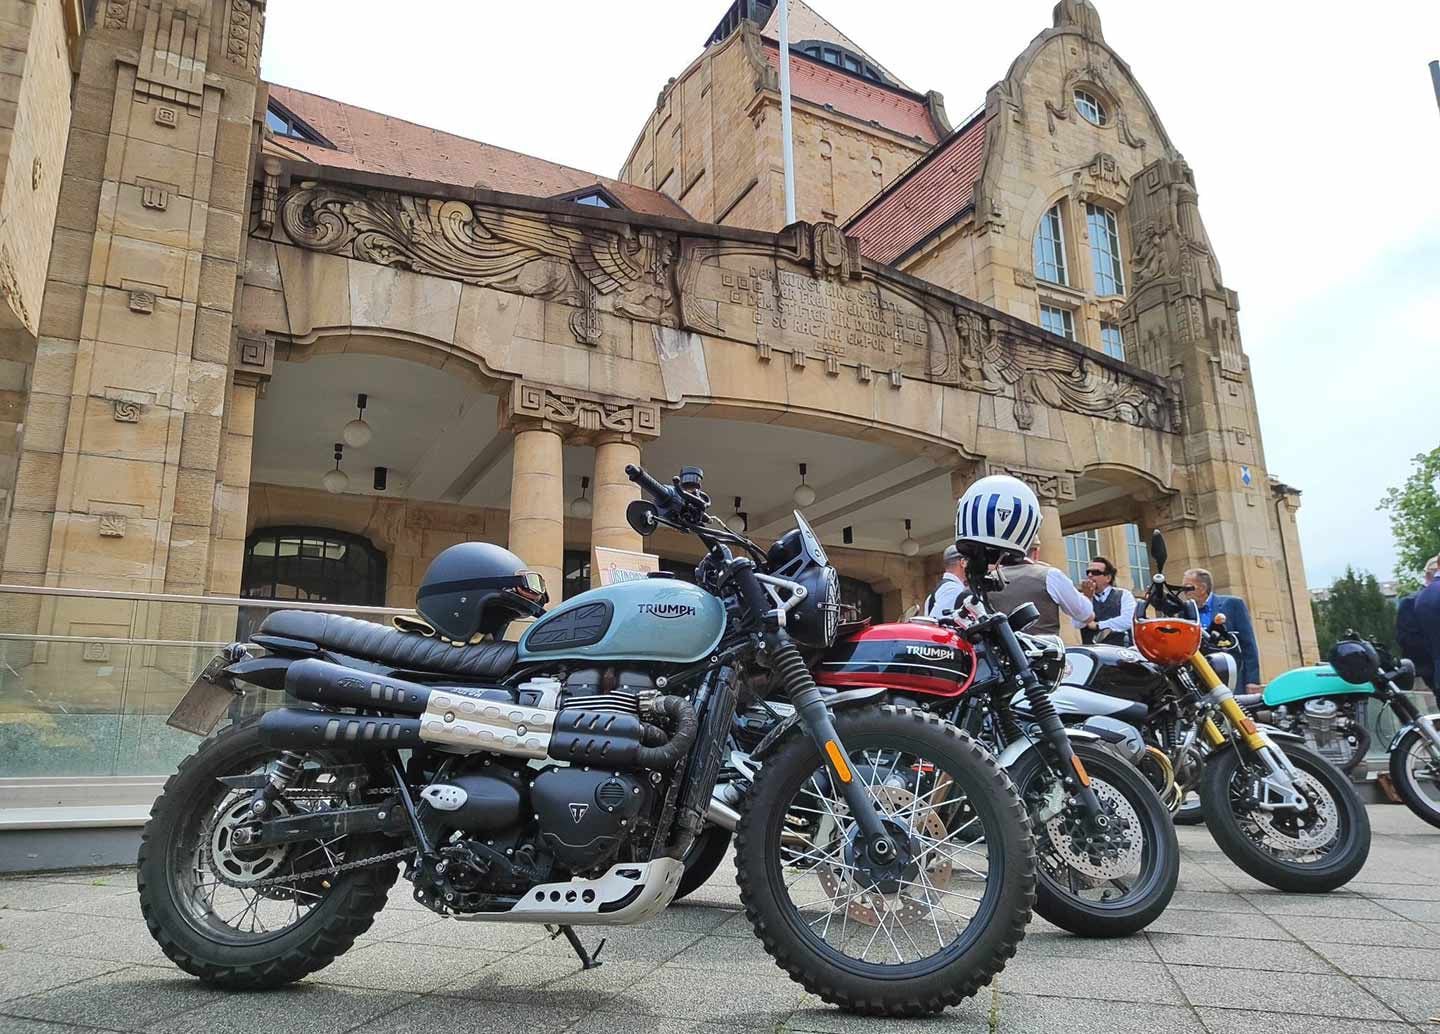 German riders do their part for the DGR in Landau, Germany.